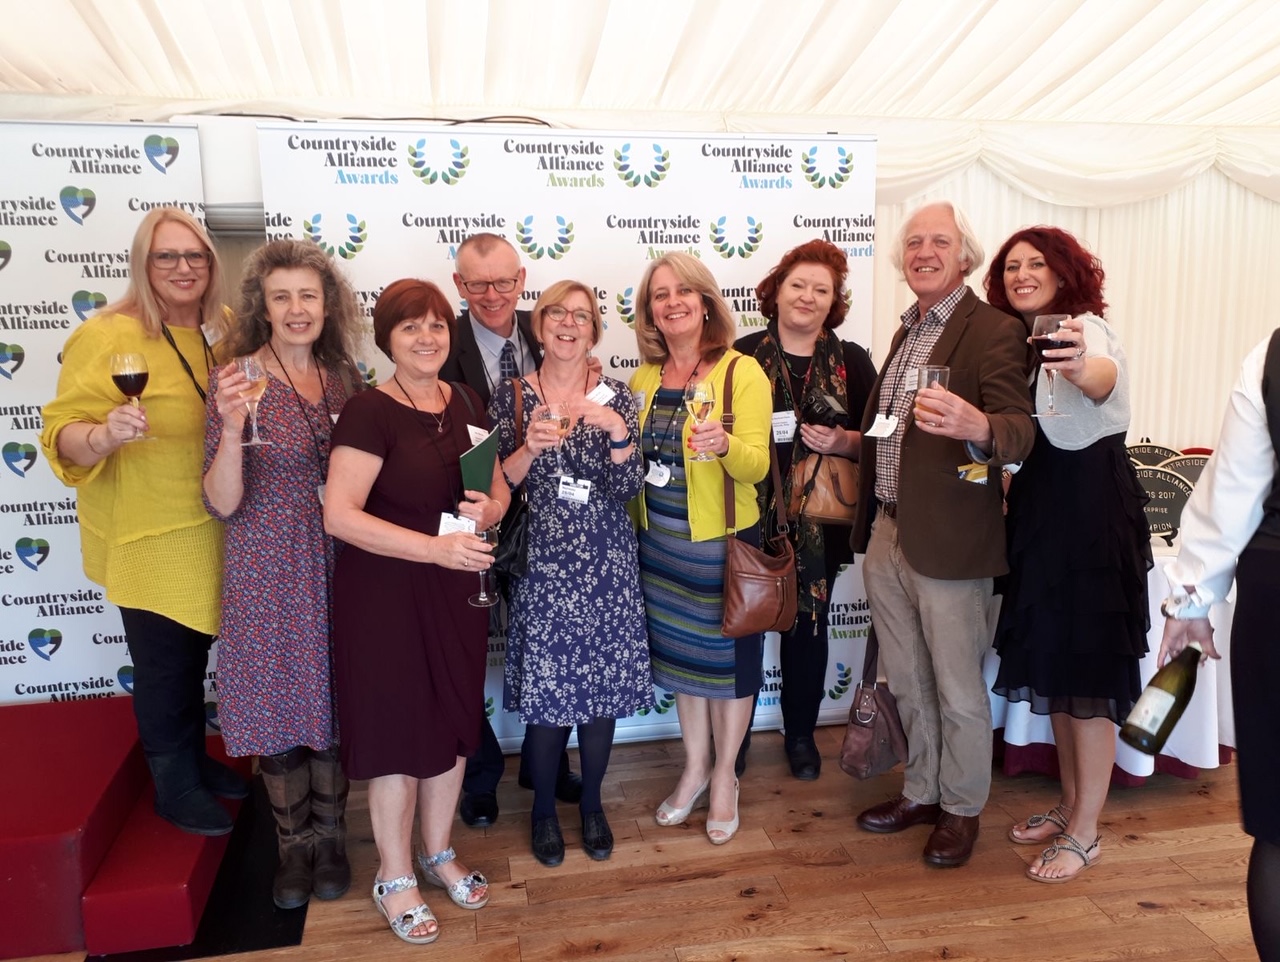 Happy winners at Countryside Alliance Awards